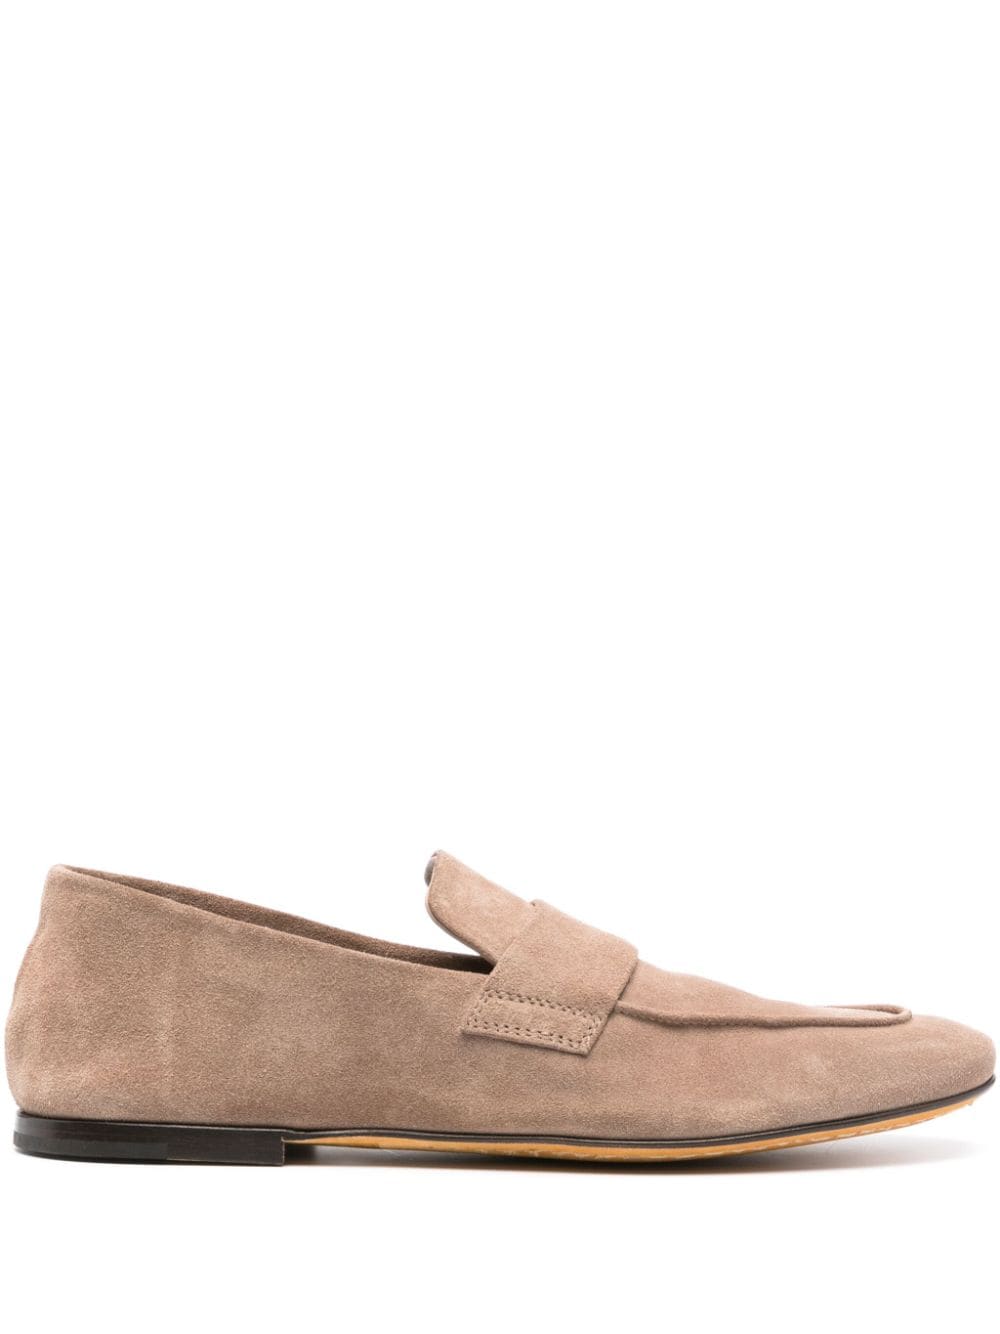 Blair 001 suede loafers